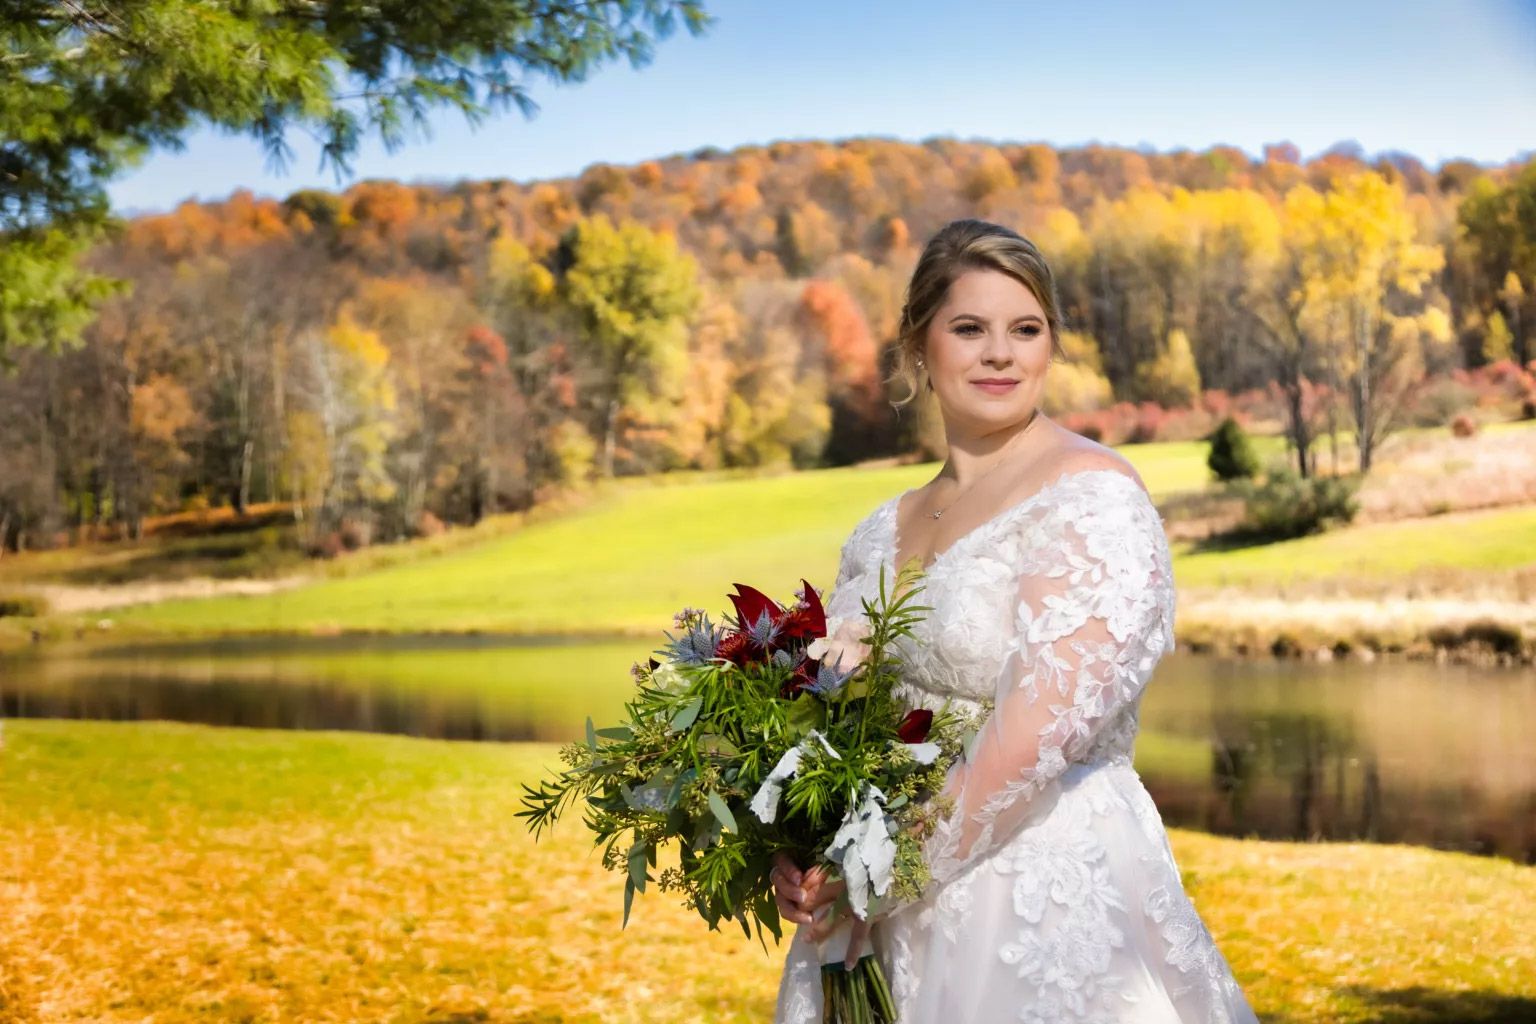 A bride in a wedding dress is holding a bouquet of flowers in front of a lake.